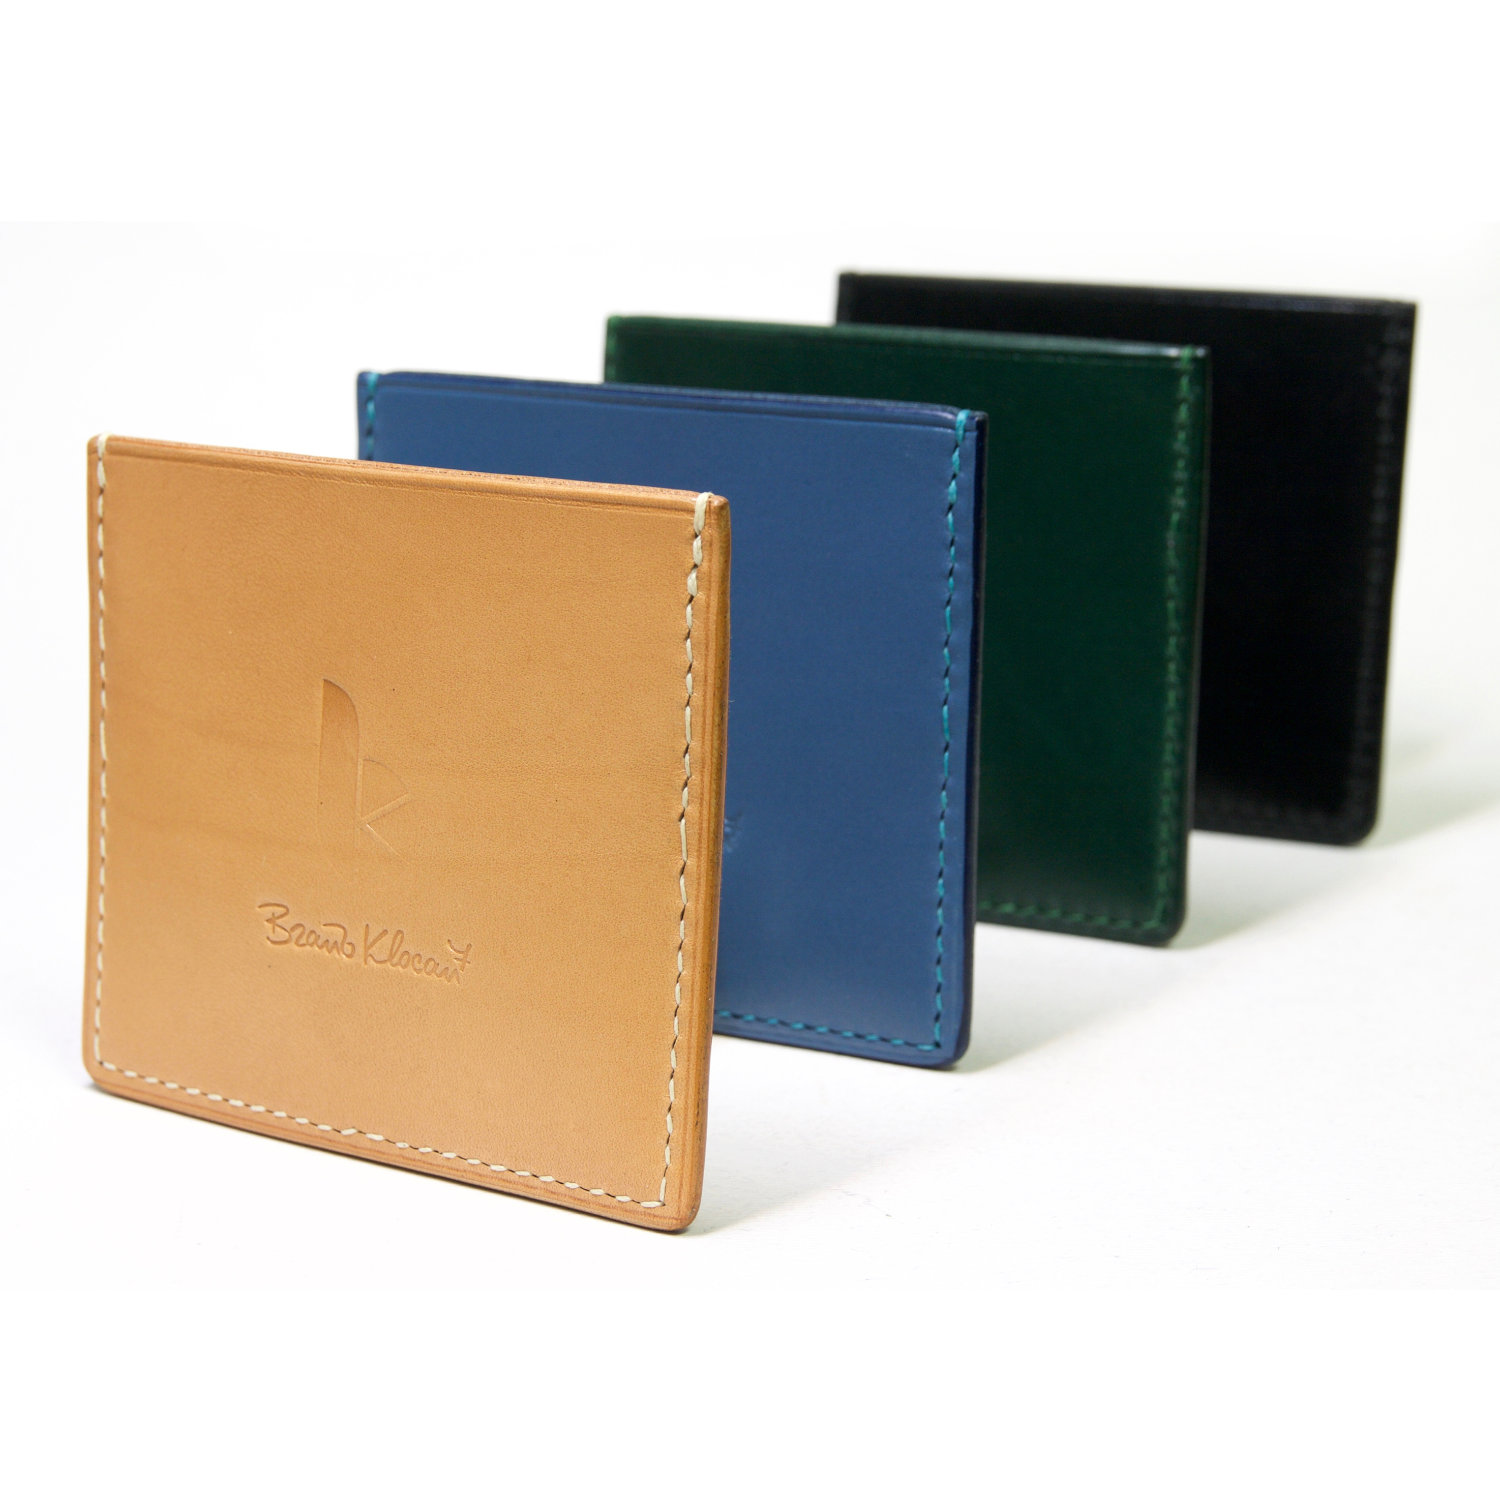 leather cardholders standing in a row rear view